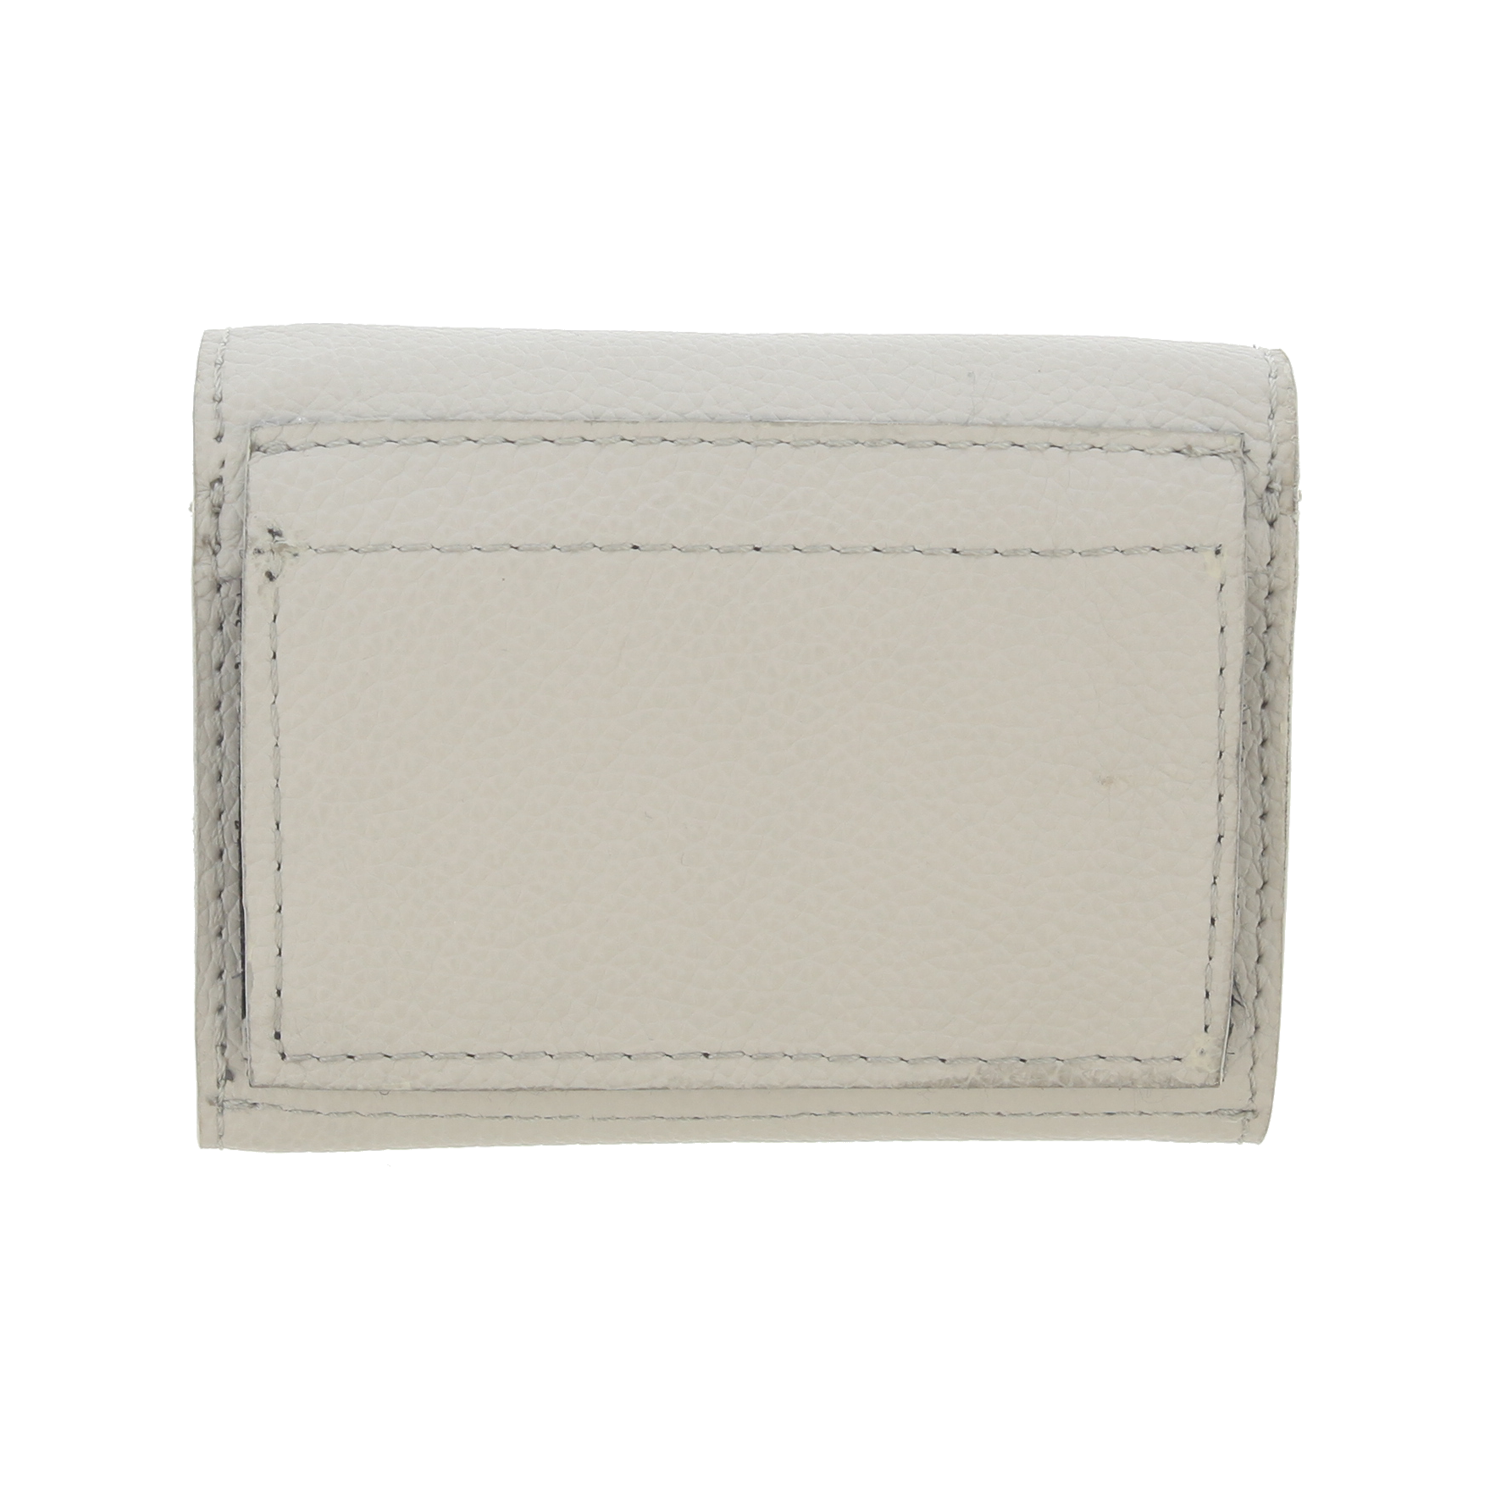 Card Wallet Belt Coin - Creme *Limited Edition*